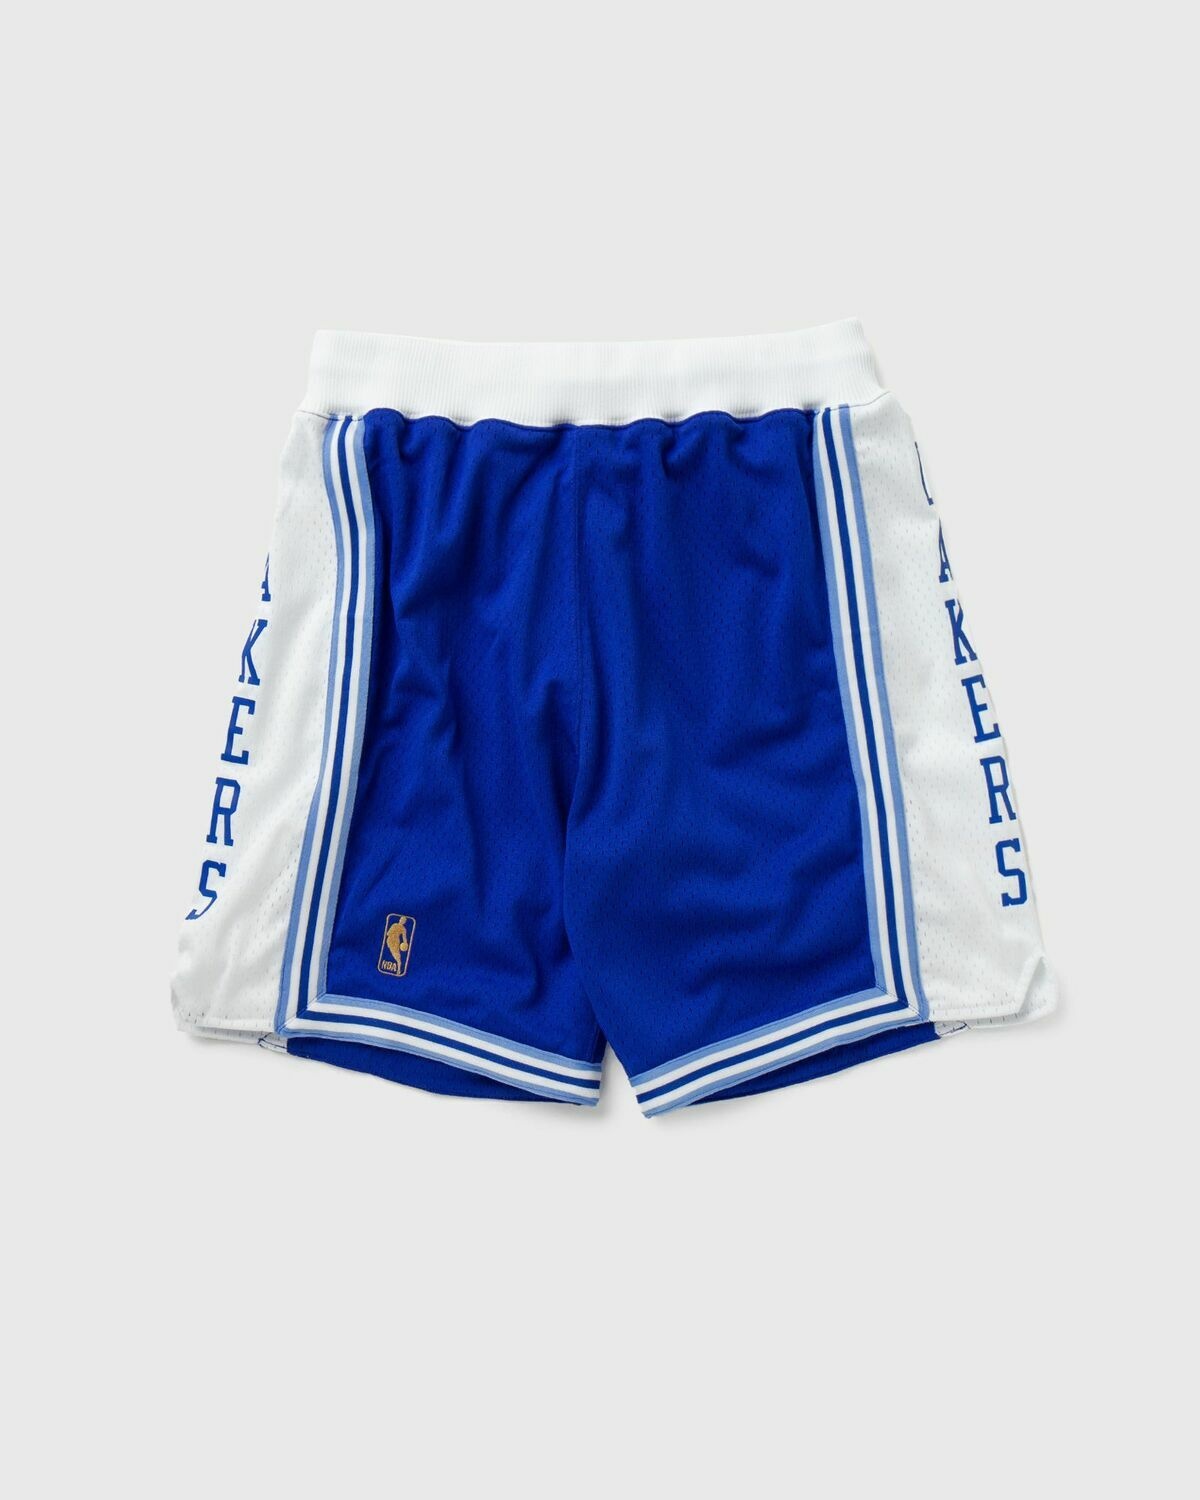 Mitchell & Ness Nba Authentic Shorts Los Angeles Lakers Alternate 1996 97 Blue - Mens - Sport & Team Shorts